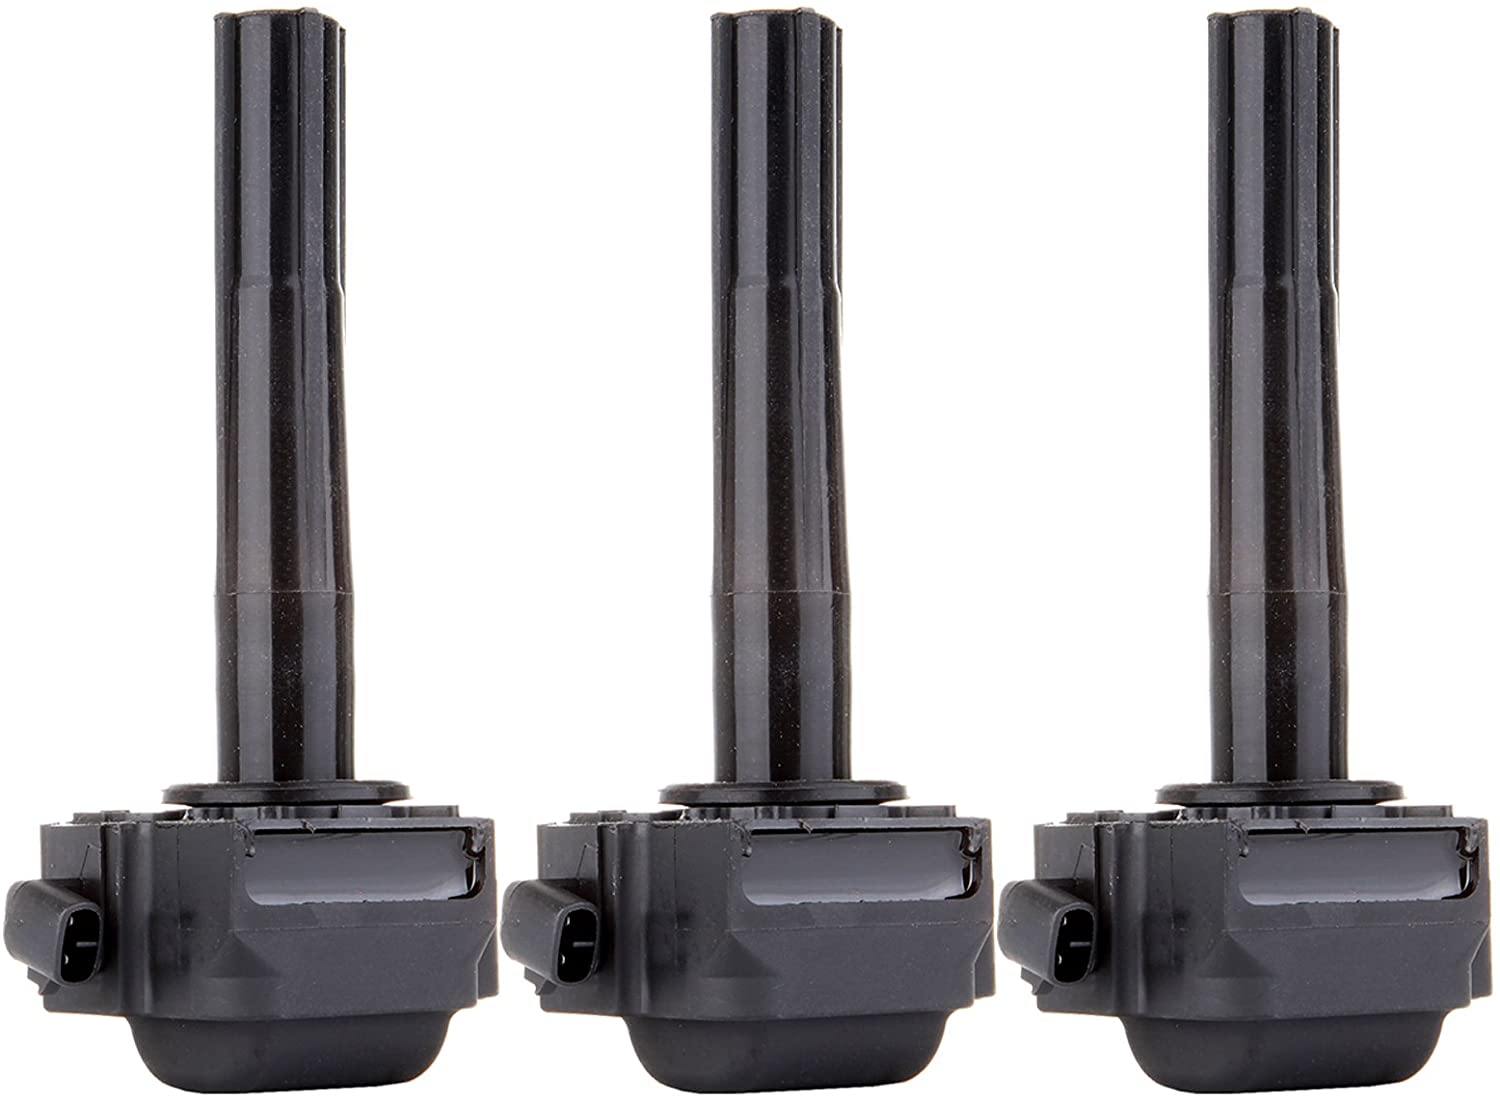 SCITOO Ignition Coils Pack of 3 Compatible with Lexu-s ES300 Toyot-a Avalon/Camry/Sienna/Solara 1996-2003 Automobiles Fit for OE: UF155 C1040